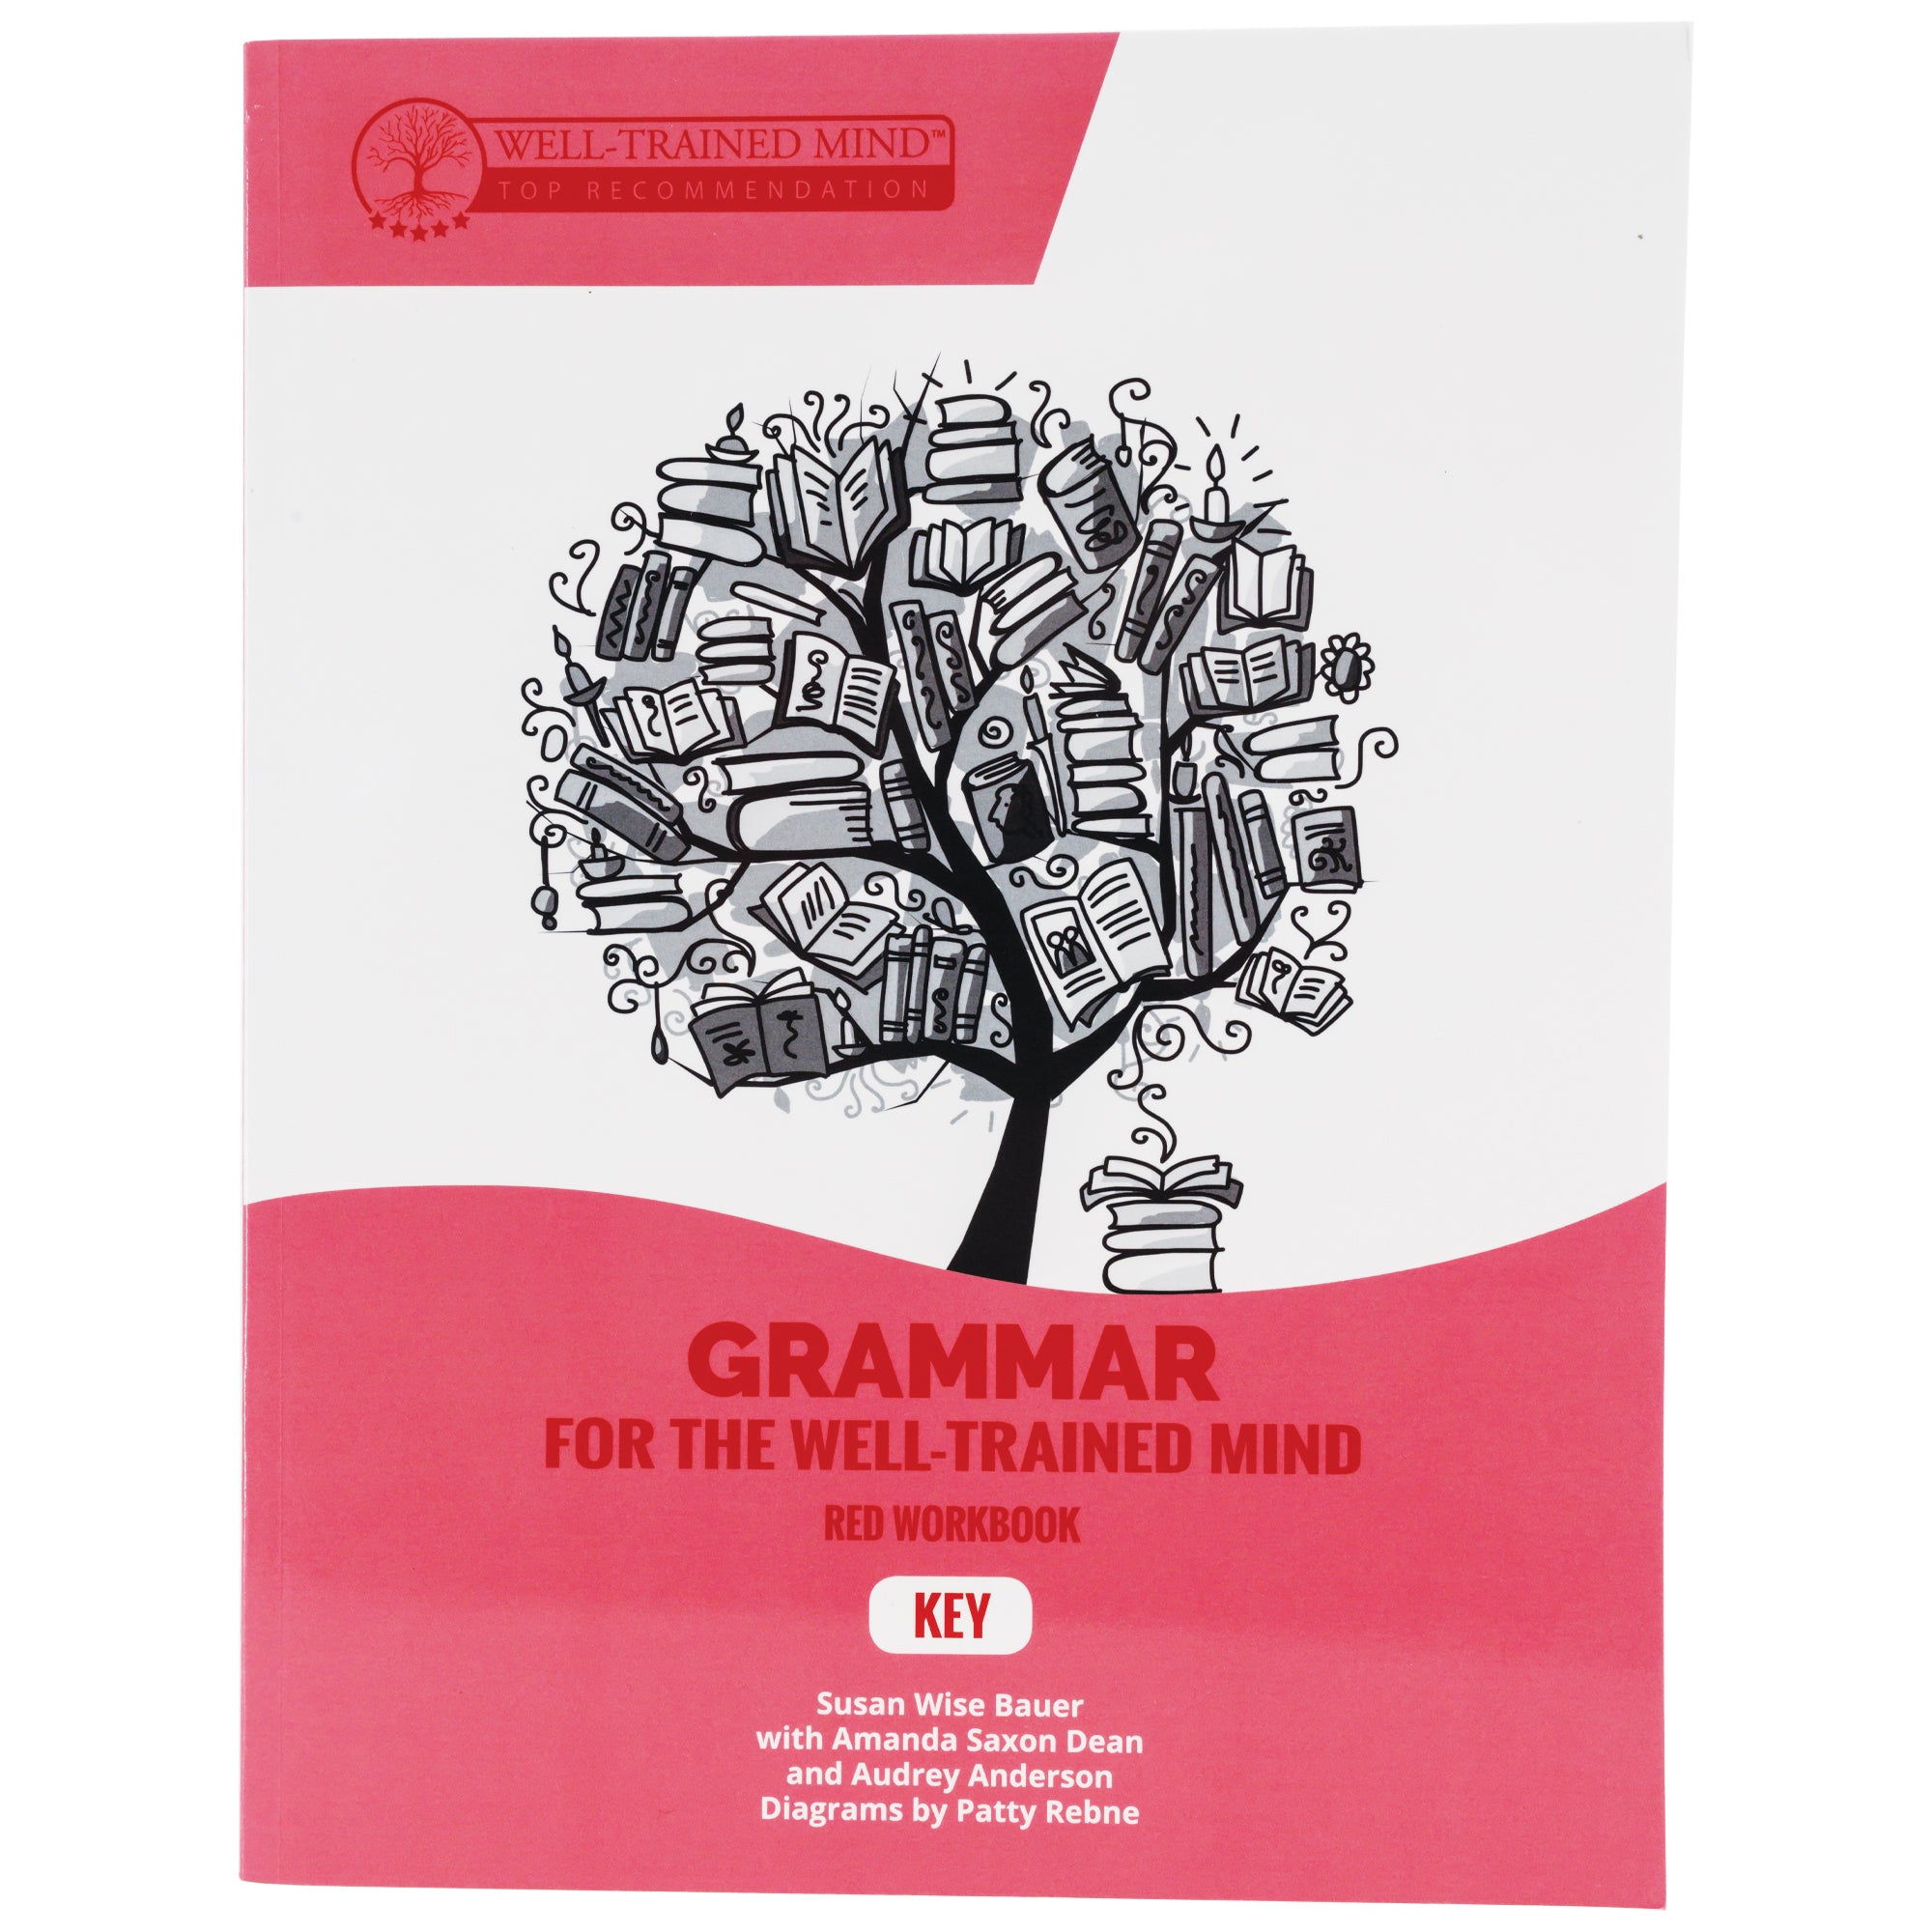 Grammar for the Well-Trained Mind pink book cover. The cover has a white top and a pink bottom with a wave shape between the 2 colors. There is an illustration in the white section of a tree with books for leaves and a stack of books near the trunk. In the pink section at the bottom is red text with the title and text reading “Red Workbook” and “Key.”